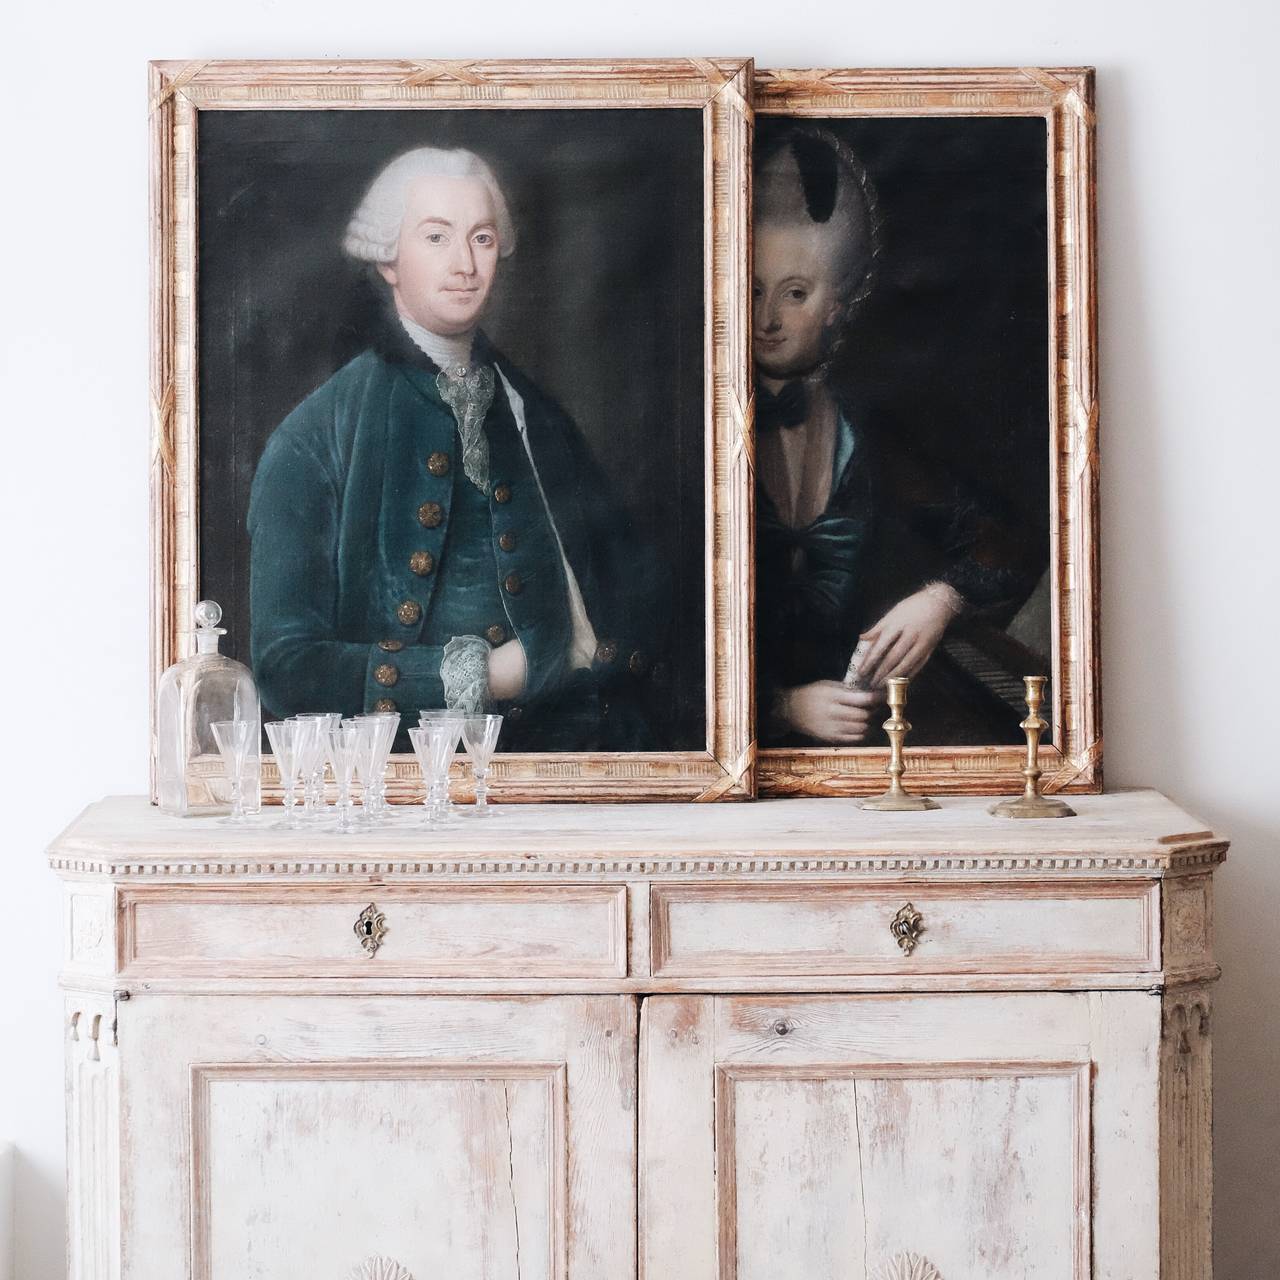 Ulrich Ferdinandt Beenfeldt (1714-1782): Pair of portraits of Johan Gottlieb Putscher and wife. Signed and dated on the reverse. Oil on canvas in original giltwood frames.